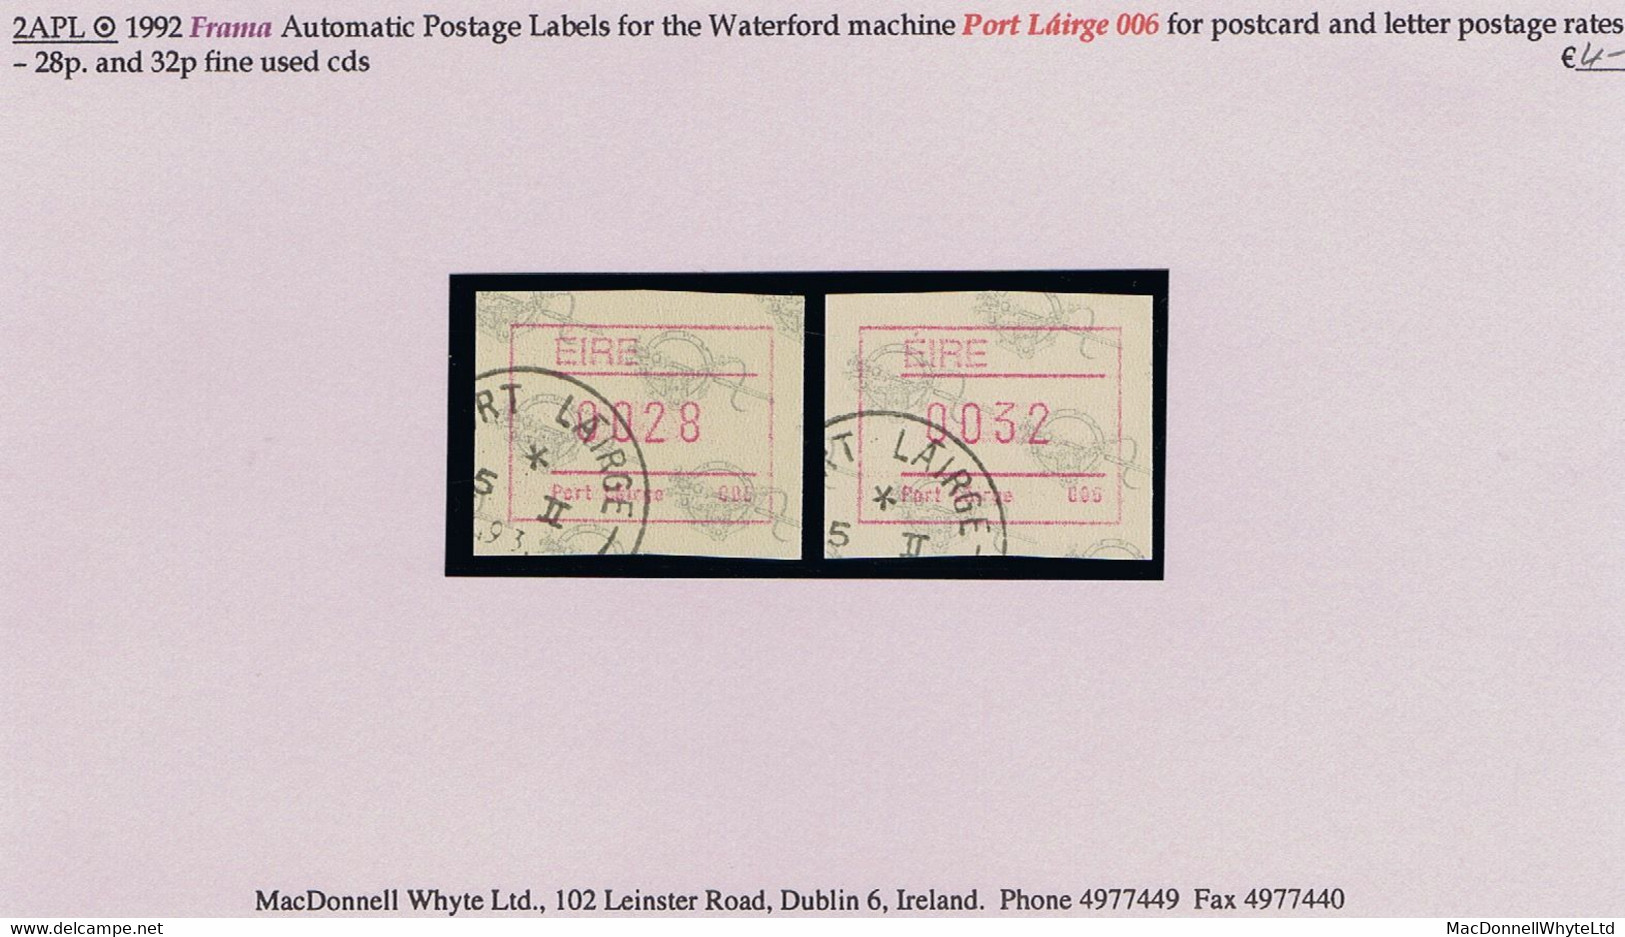 Ireland 1992 Frama Automatic Postage Labels For Waterford 006 Machine 28p Postcard Rate And 32p Letter Rate Fine Used - Viñetas De Franqueo (Frama)